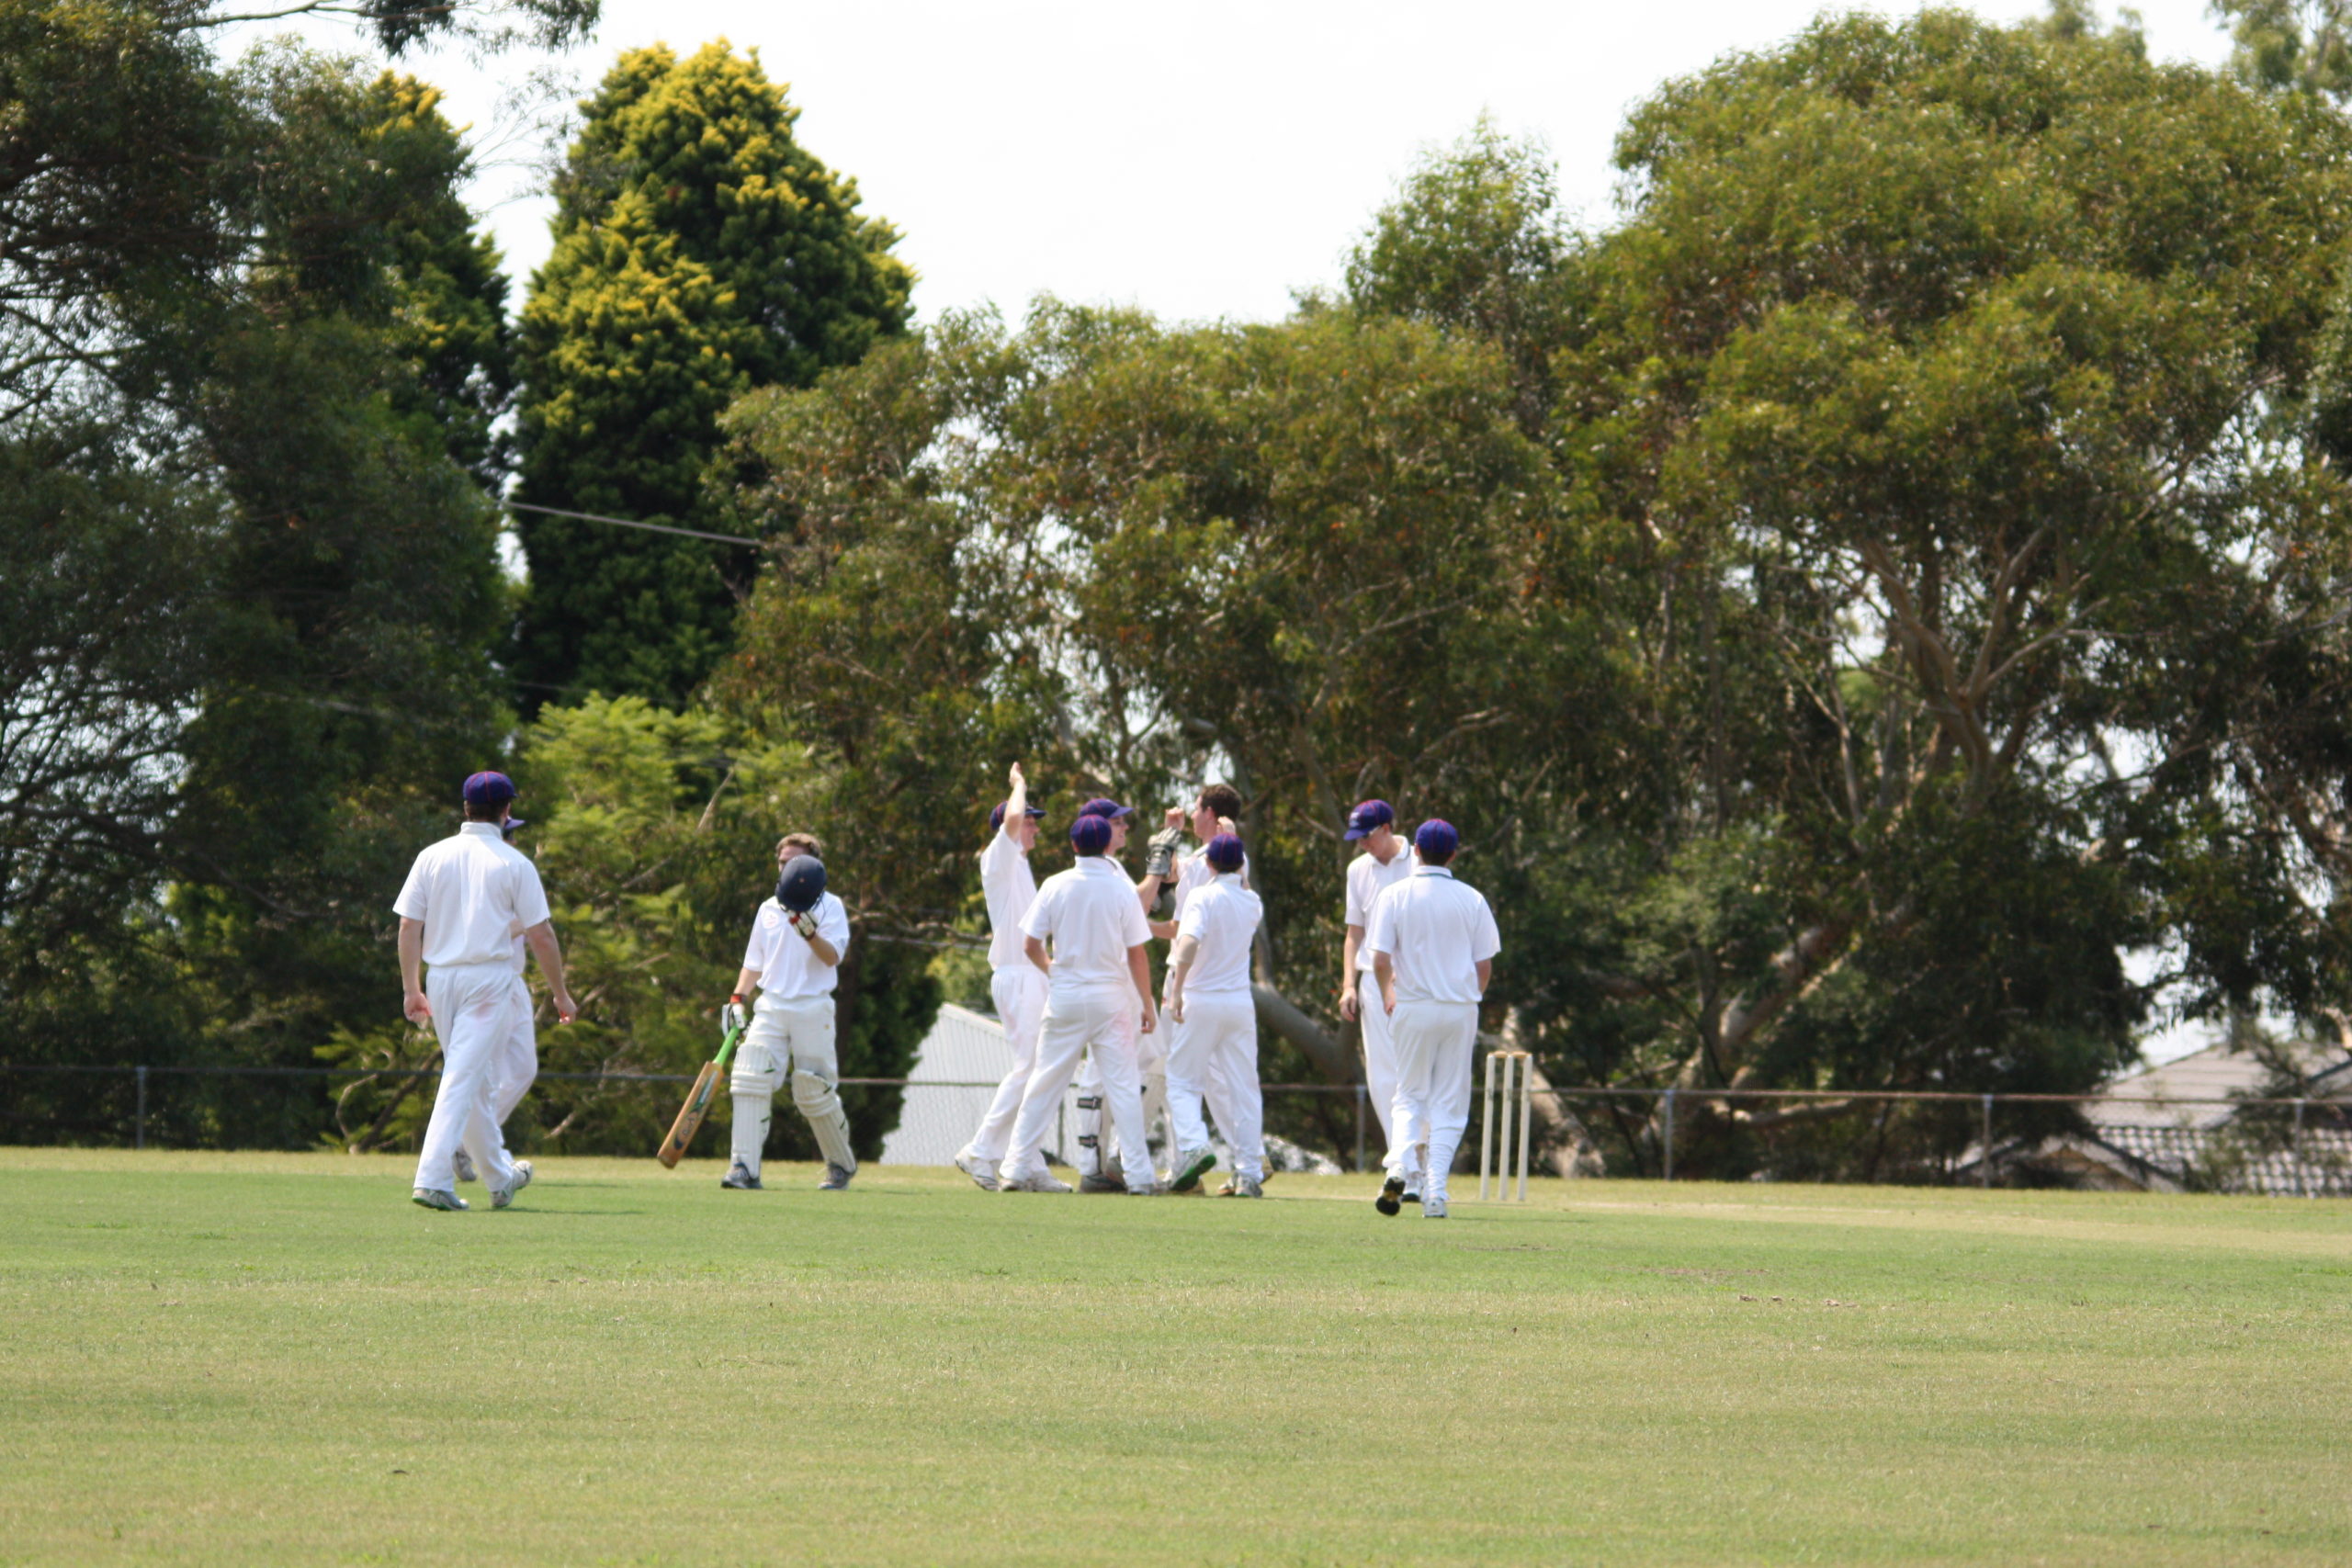 A1 Grade - Round 14 Vs Kissing point - 5 March 2011